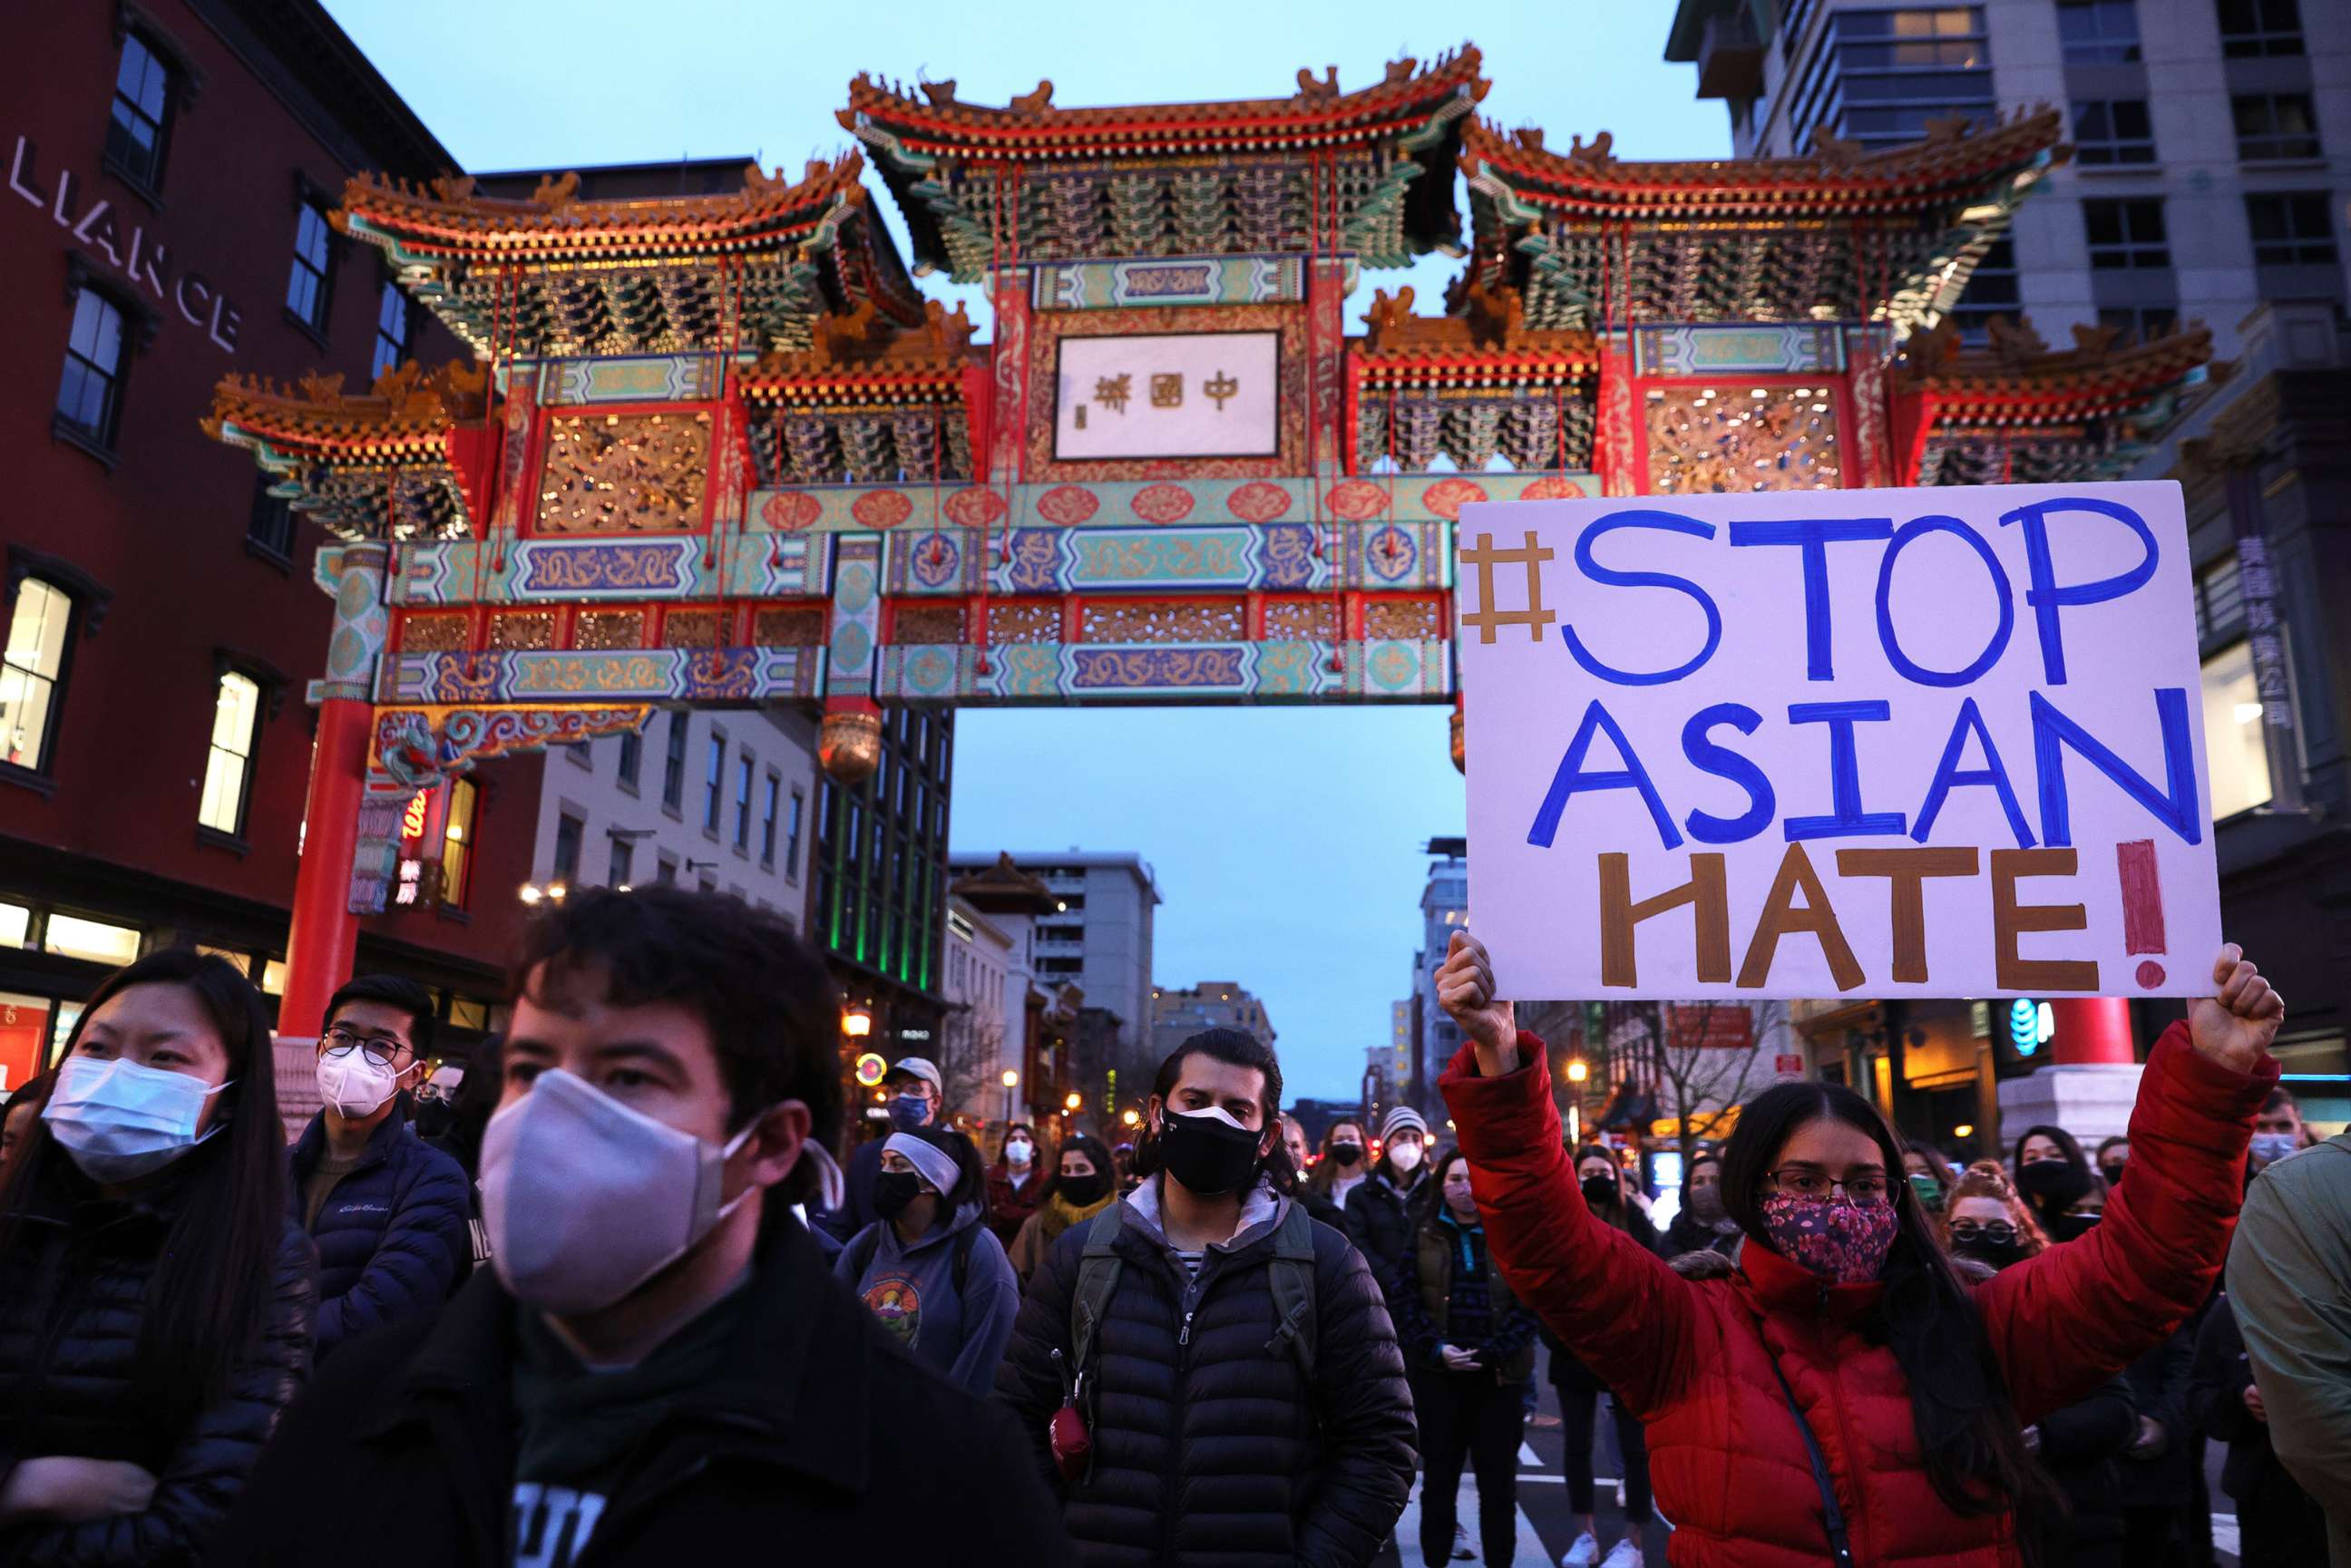 PHOTO: Activists participate in a vigil in response to the Atlanta spa shootings in which eight people were killed, March 17, 2021, in the Chinatown area of Washington, D.C.